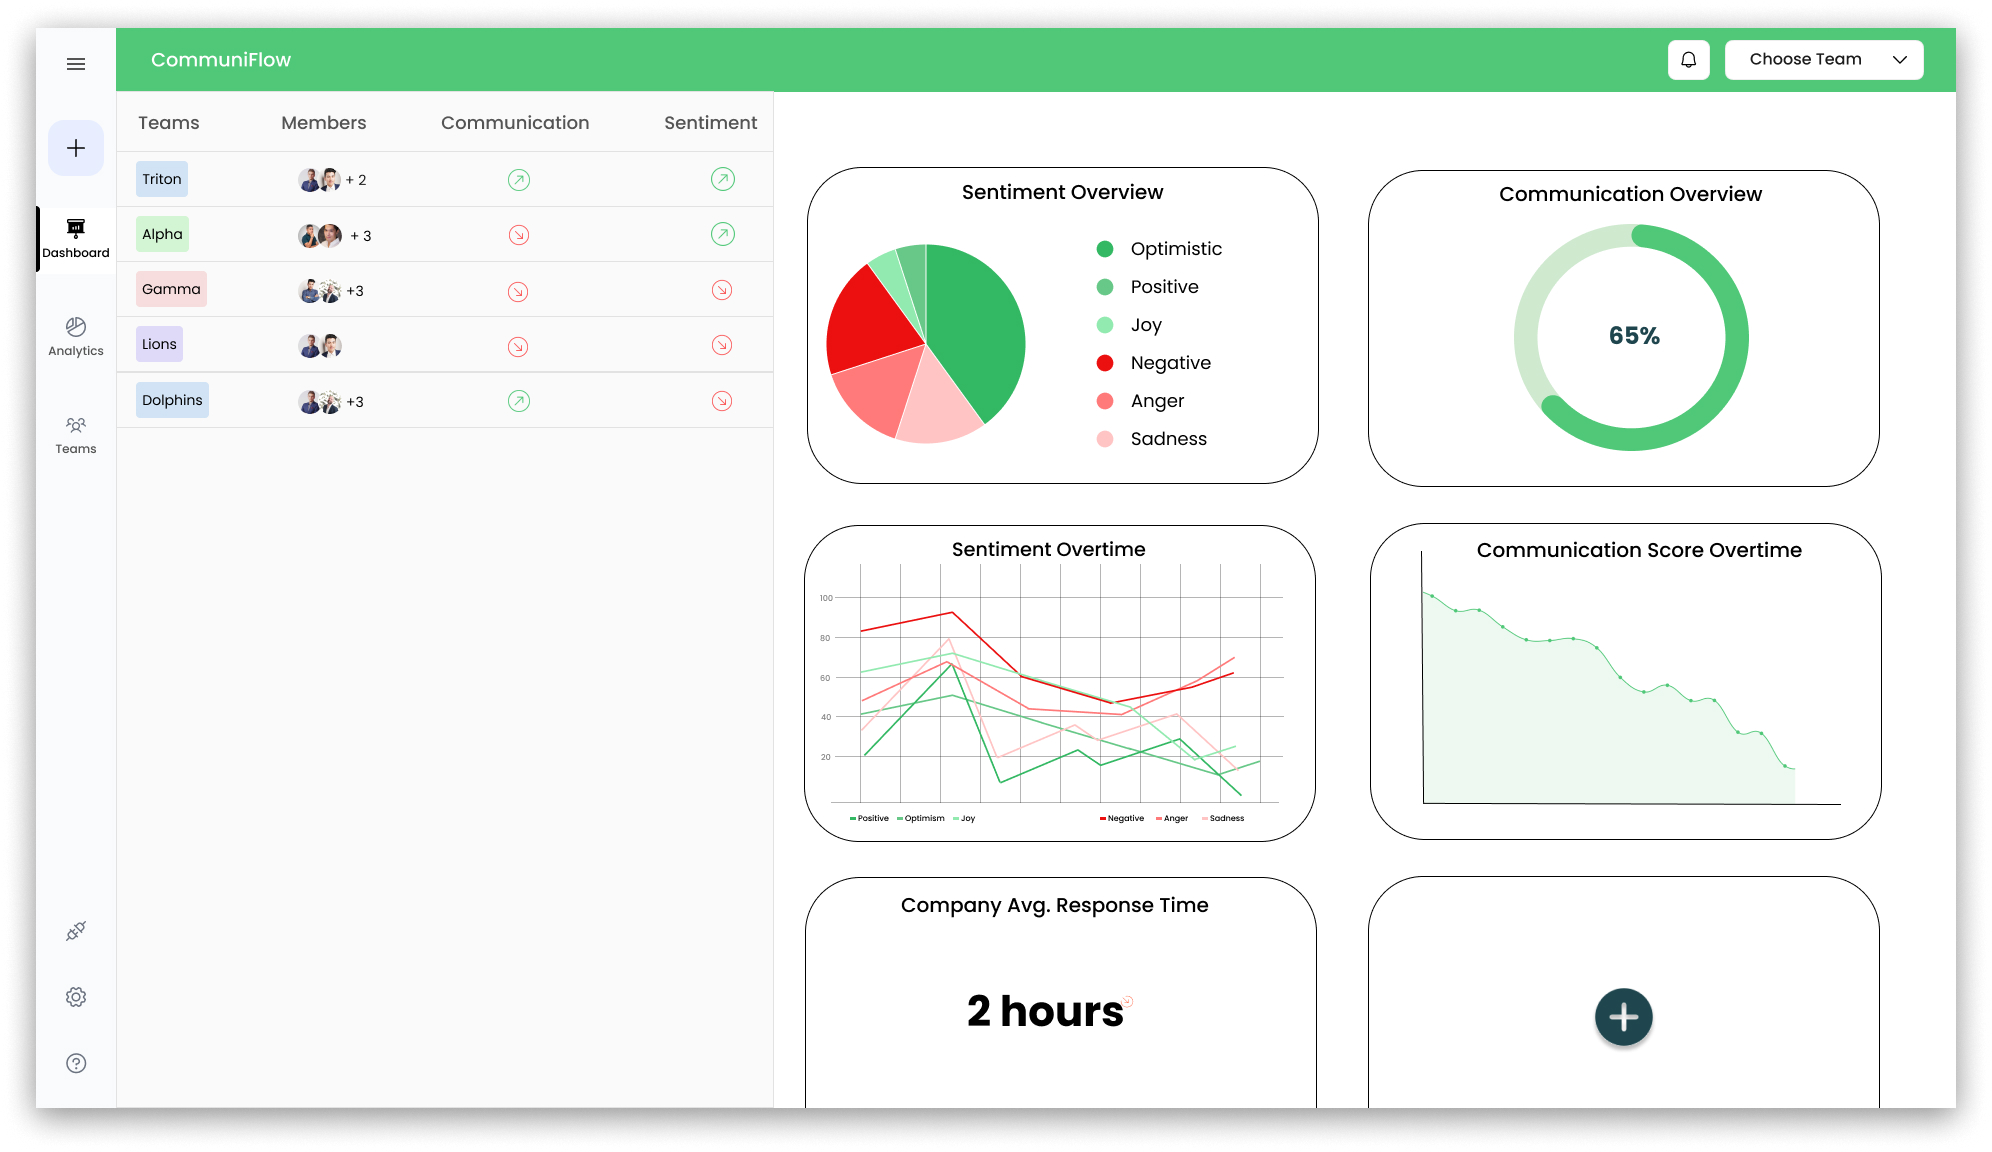 CommuniFlow Dashboard 🚀 -  our dashboard provides a comprehensive view of your organization’s communication and sentiment scores, both at the overall and team levels, for current and historical data.